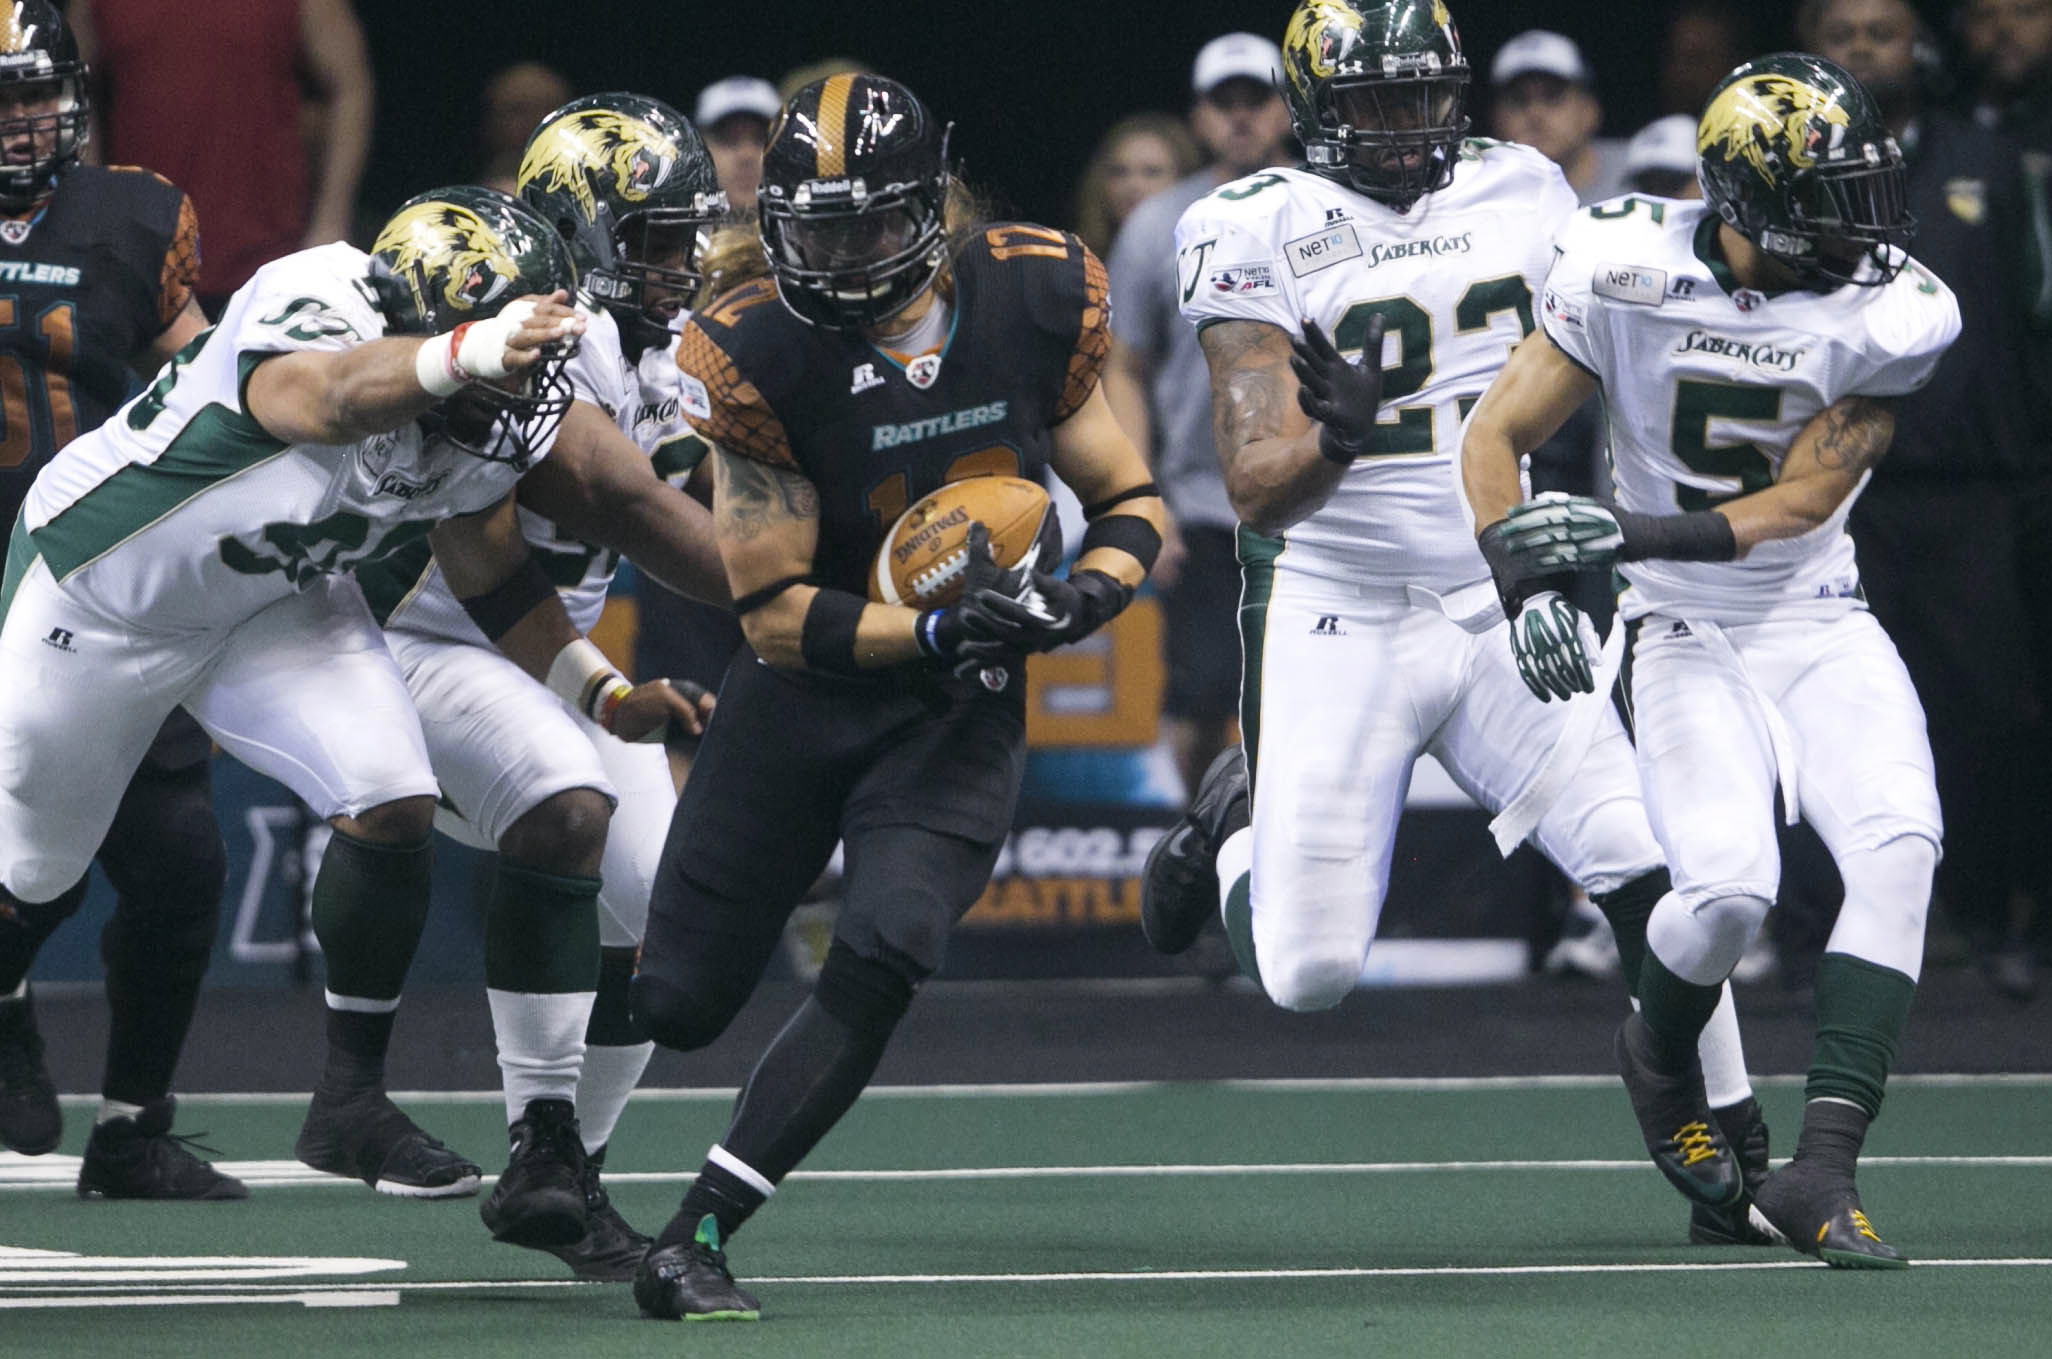 Tysson Poots of the Arena League's Arizona Rattlers.